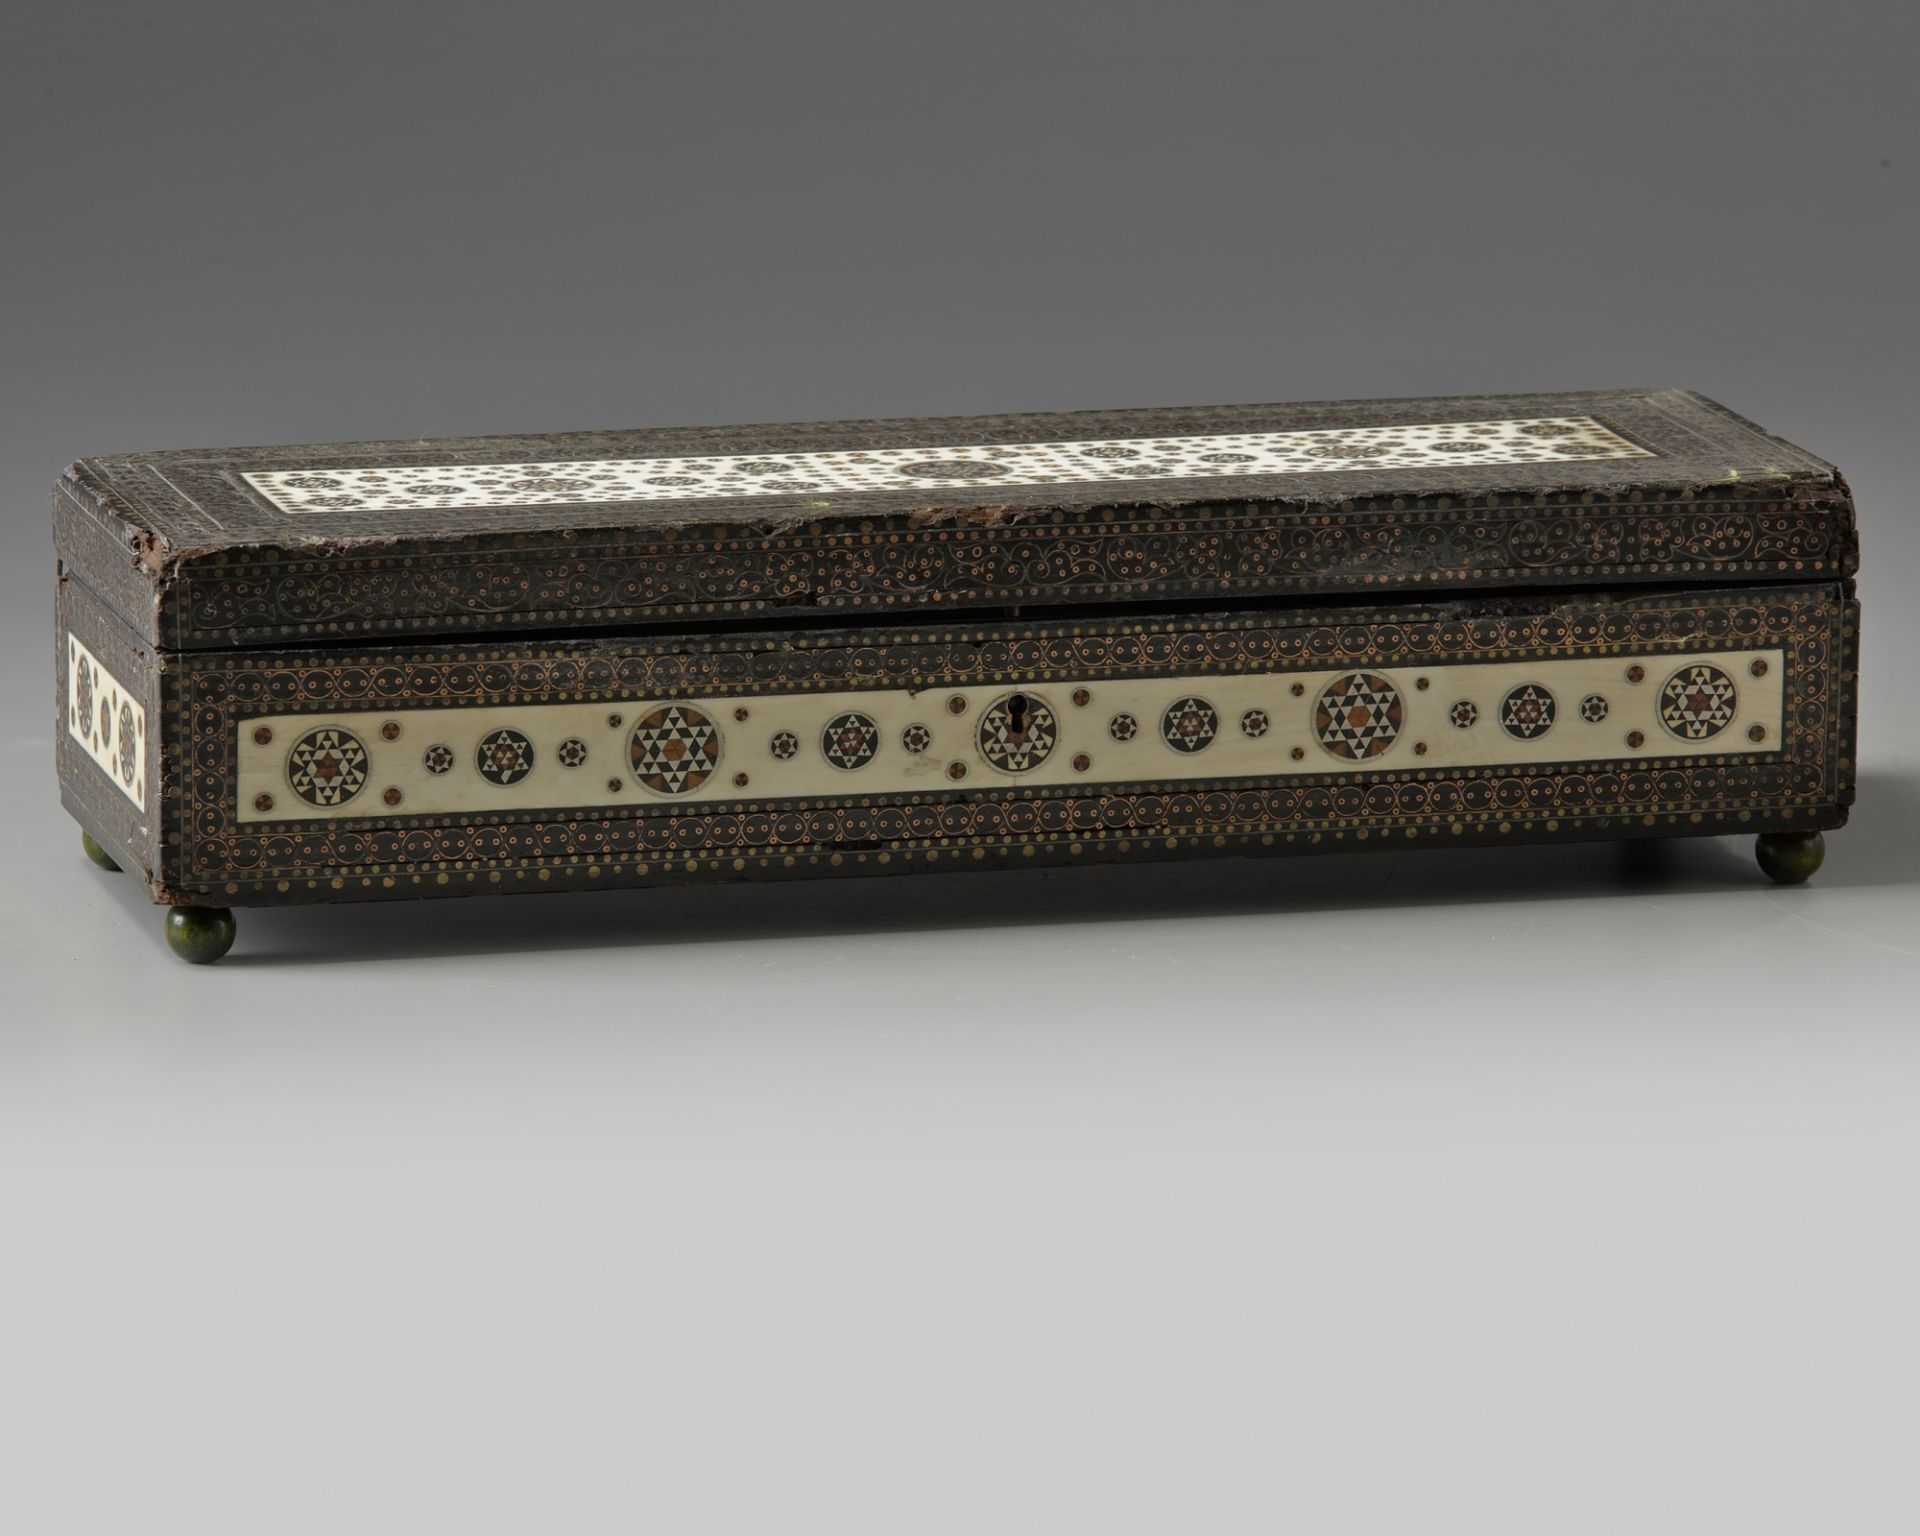 A silver and ivory inlaid wooden box - Image 2 of 4